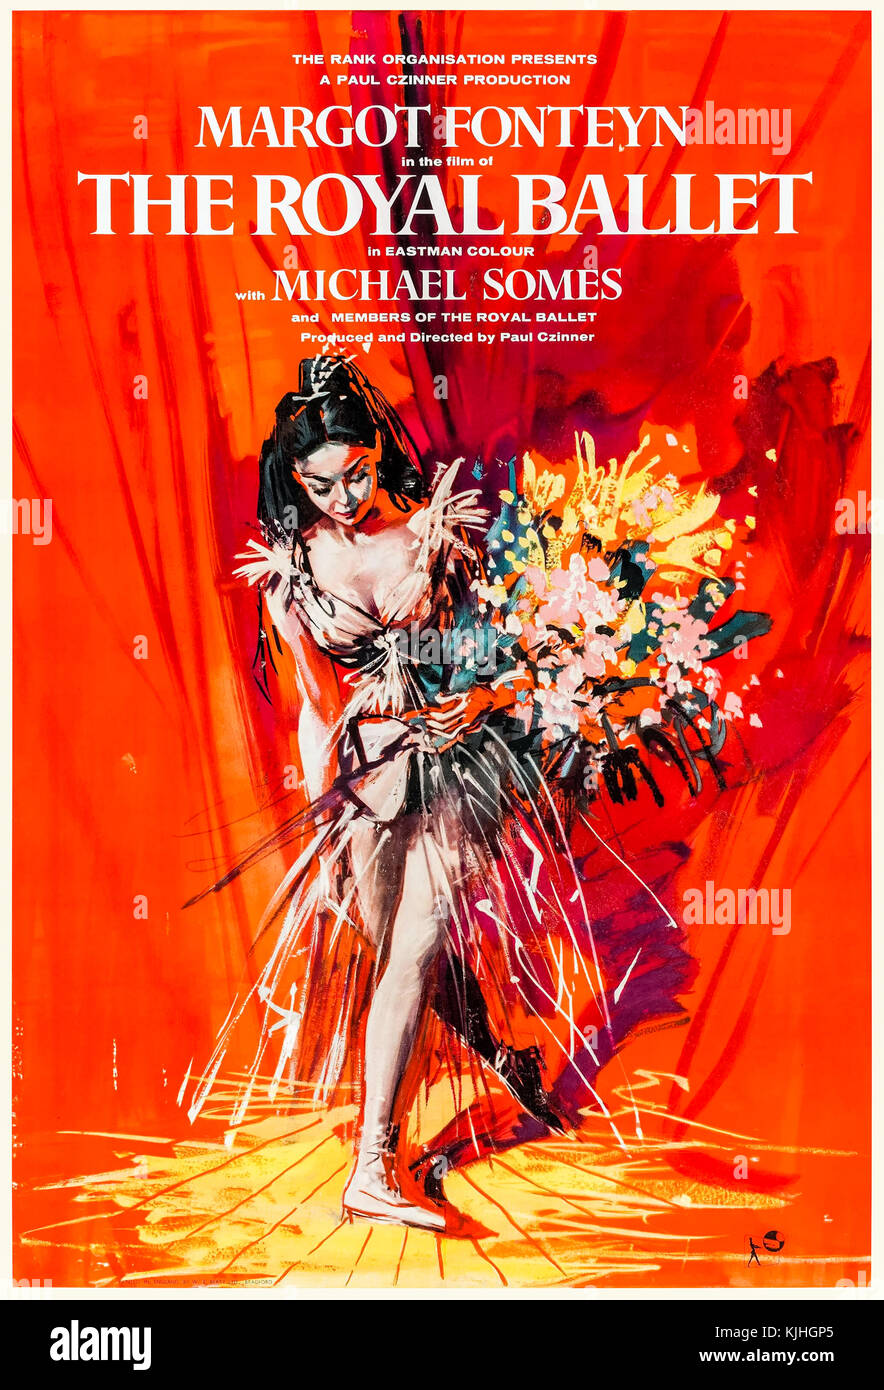 The Royal Ballet (1960) directed by Paul Czinner and starring Margot Fonteyn, Michael Somes and Brian Ashbridge. A showcase of 3 Royal Ballet productions filmed in 1960 at the Royal Opera House, London. Stock Photo